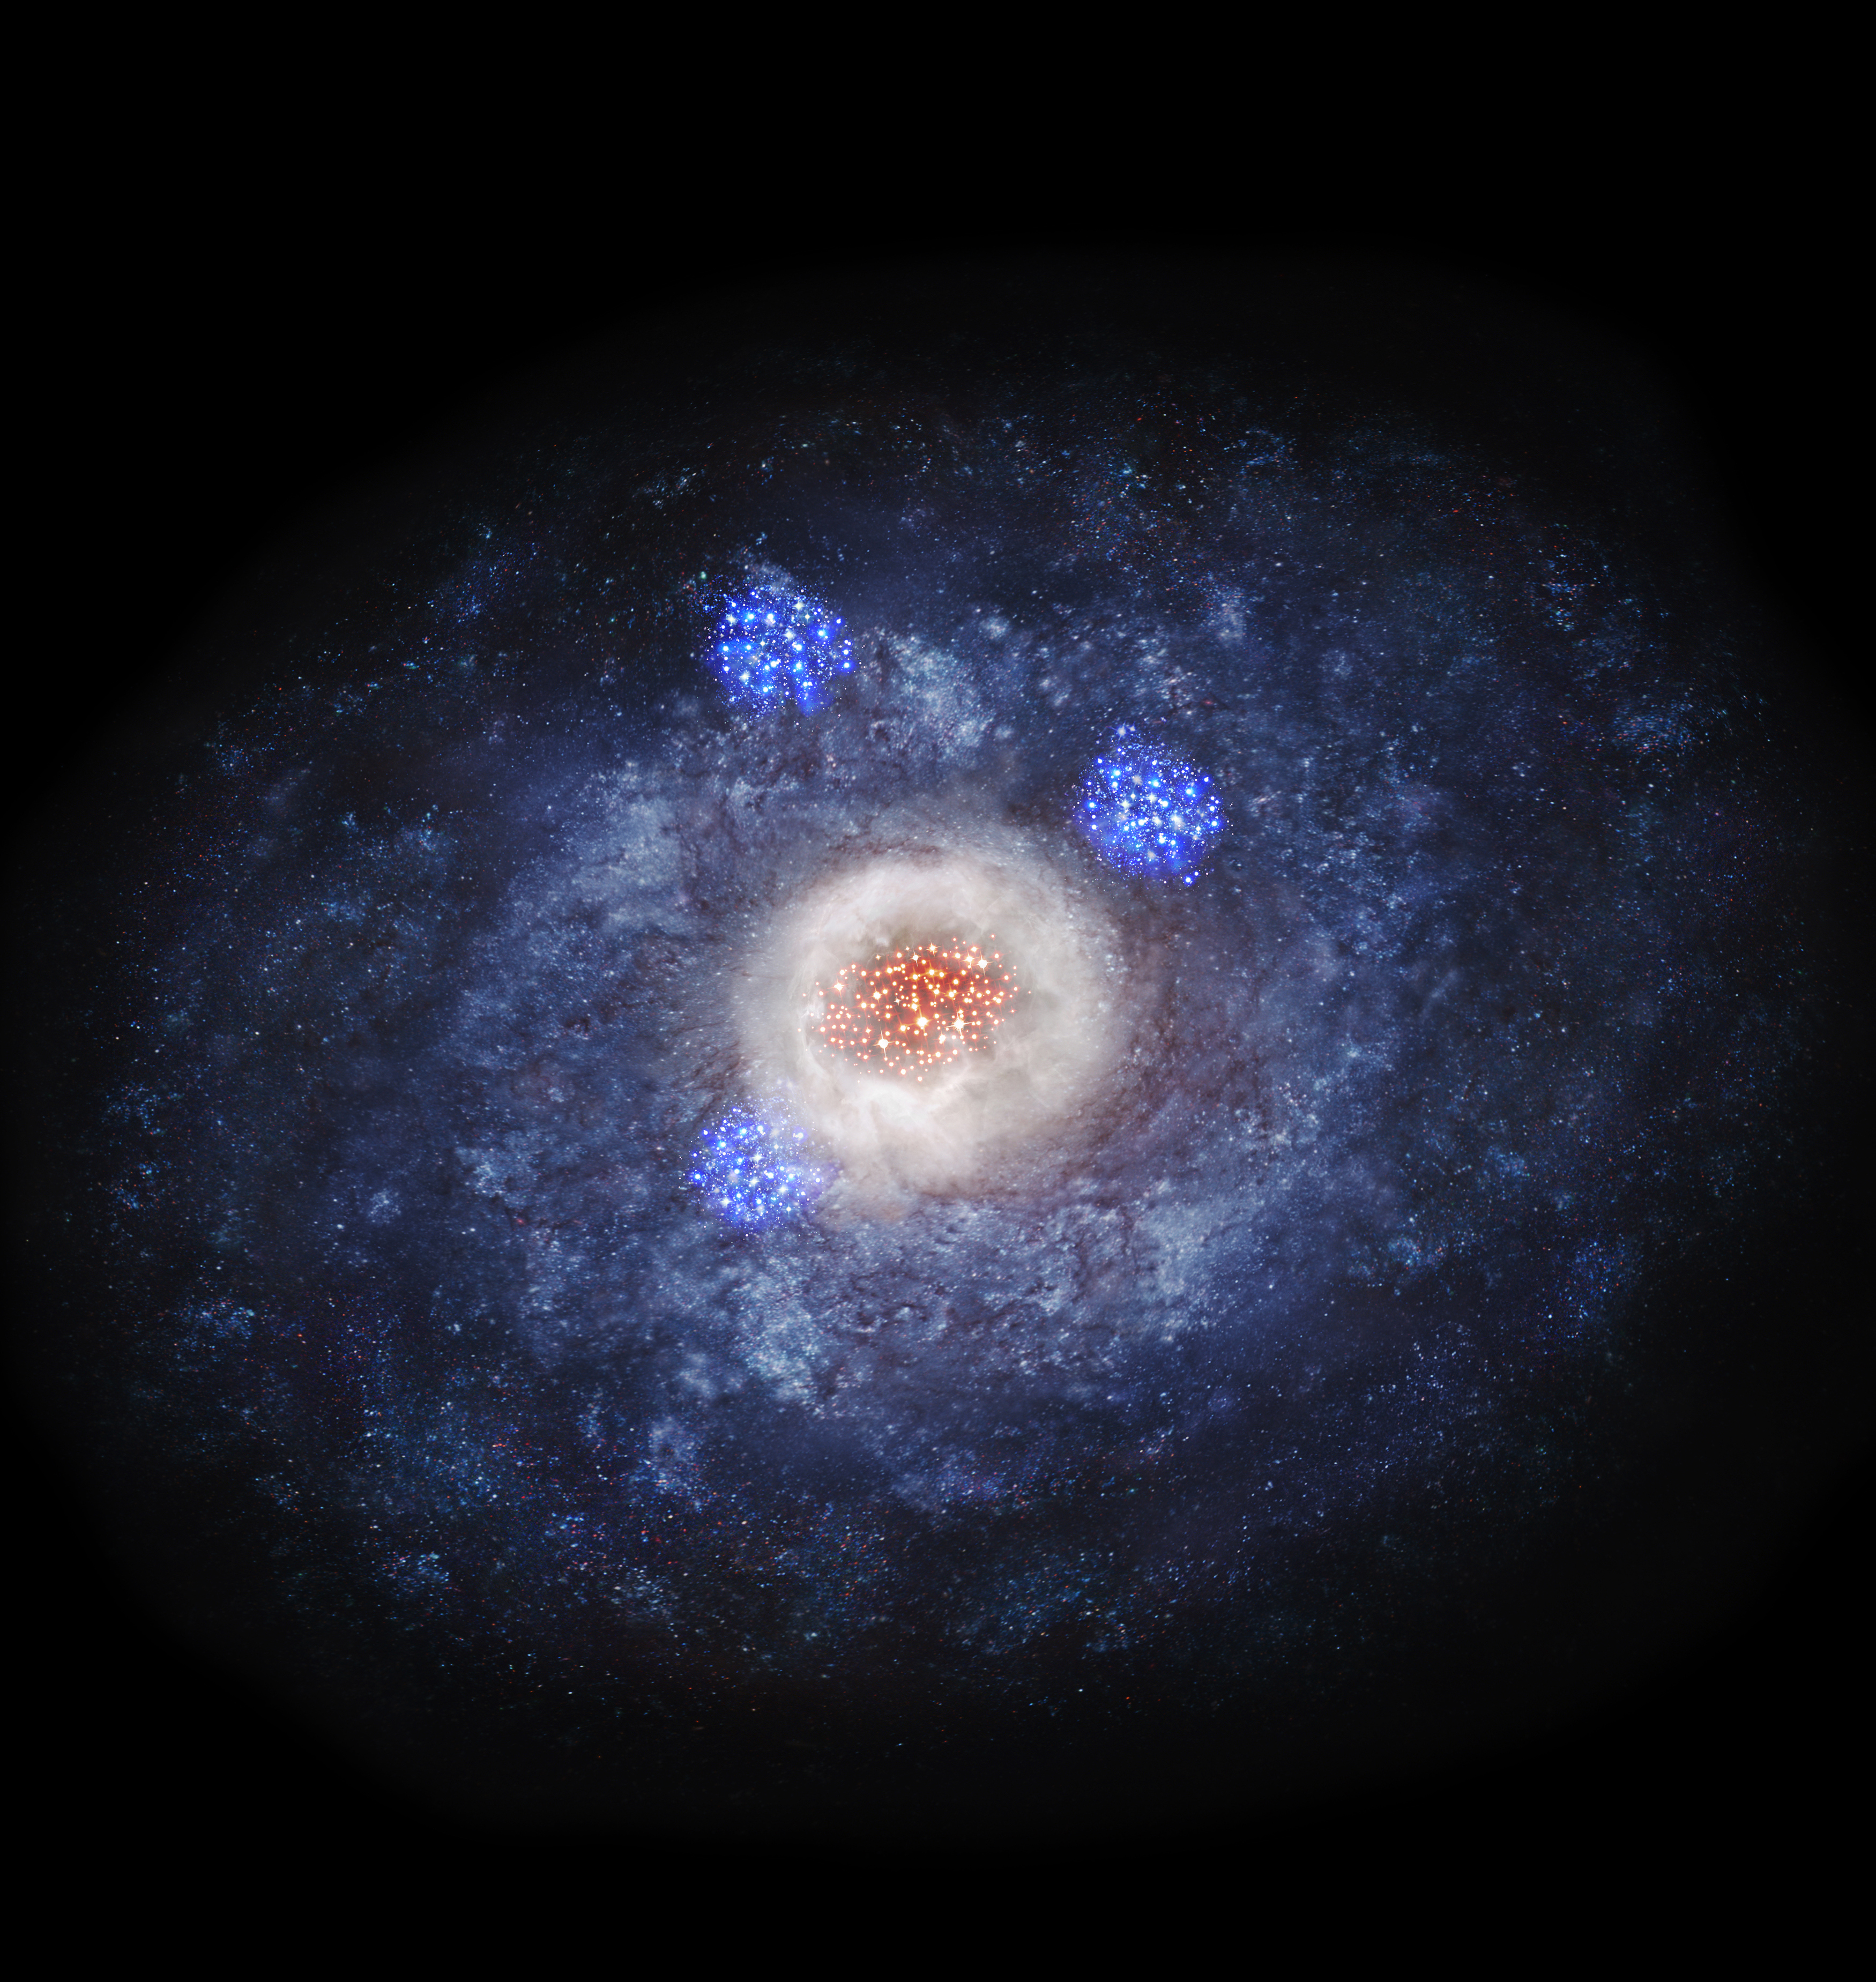 Artist’s impression of a disk galaxy transforming in to an elliptical galaxy. Stars are actively formed in the massive reservoir of dust and gas at the center of the galaxy.
Credit: NAOJ

アルマ望遠鏡とハッブル宇宙望遠鏡で観測した110億光年かなたの銀河の想像図。円盤を持つ銀河の中心部で、塵におおわれた中で活発に星が作られています。円盤部には、3つの巨大星団が見えています（ハッブル宇宙望遠鏡の可視光画像で見えている星団に相当）。
Credit: 国立天文台 

<a href="https://alma-telescope.jp/news/press/galactic_metamorphosis-201709" target="_blank">銀河の形を運命づけた110億年前の転換現象Explosive Birth of Stars Swells Galactic Cores</a>